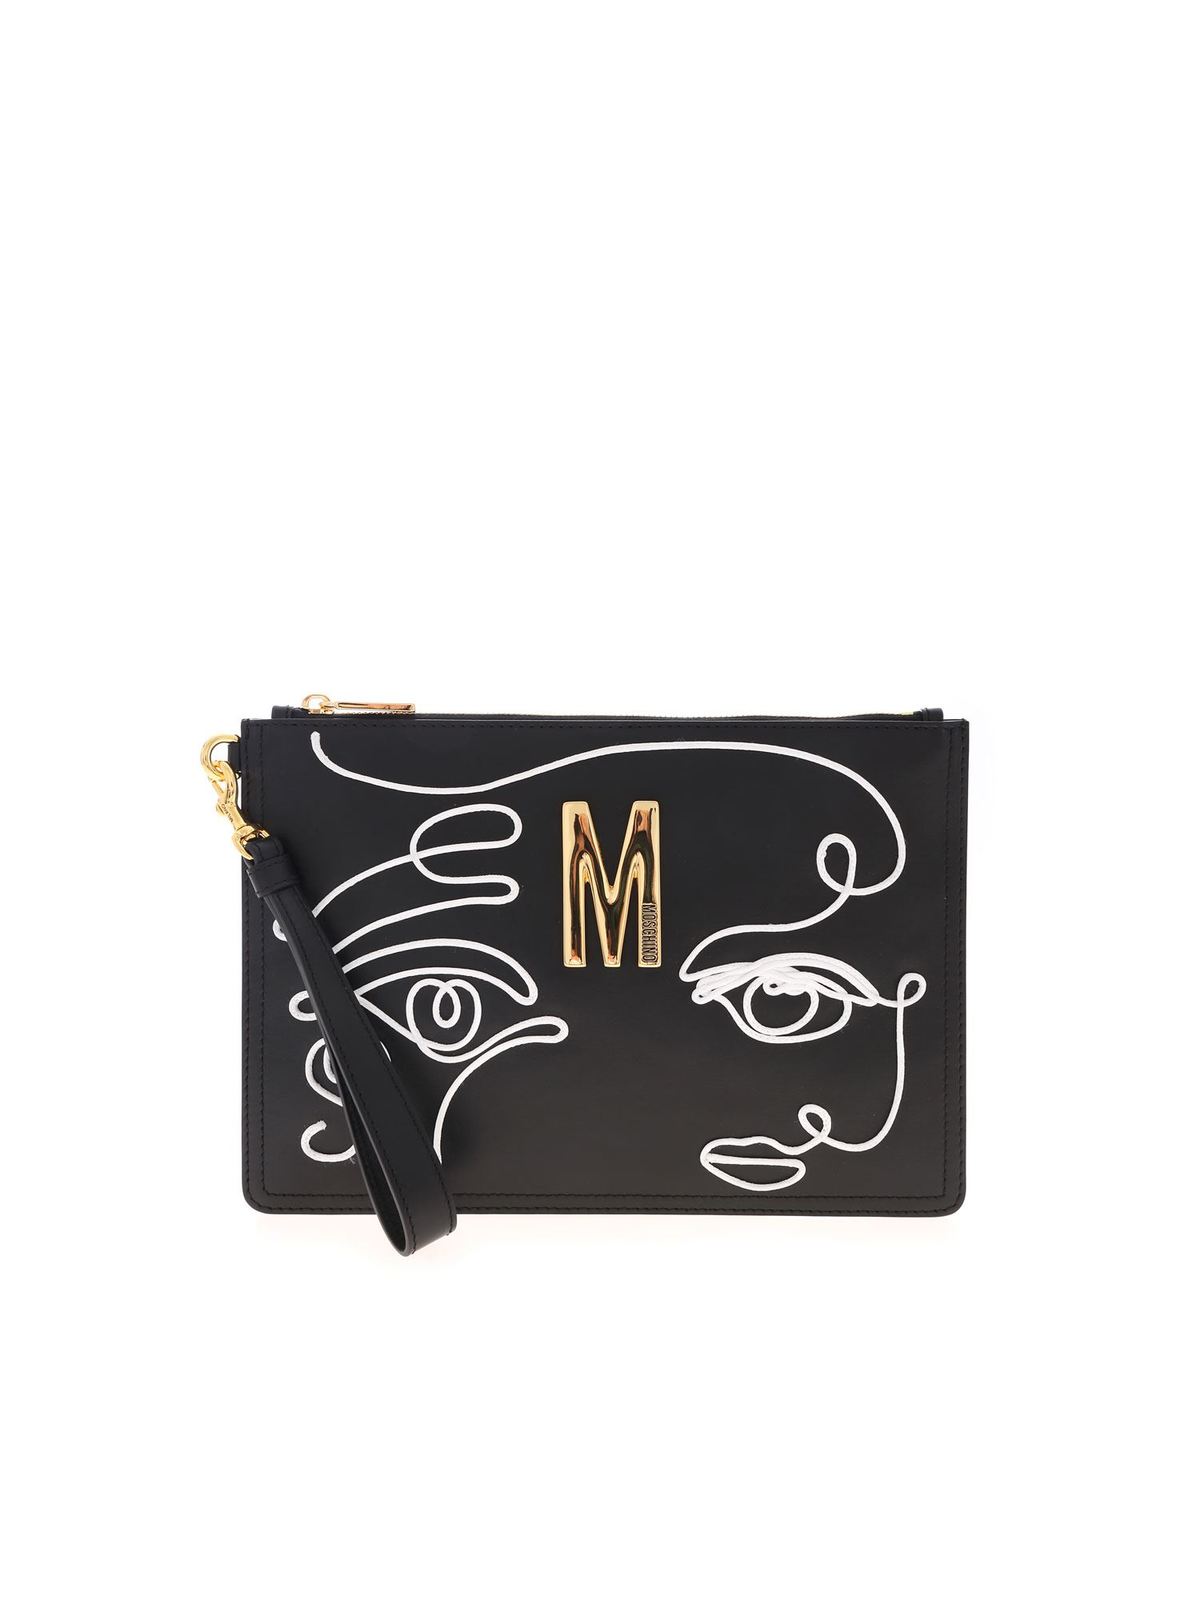 MOSCHINO WHITE DRAWING CLUTCH BAG IN BLACK